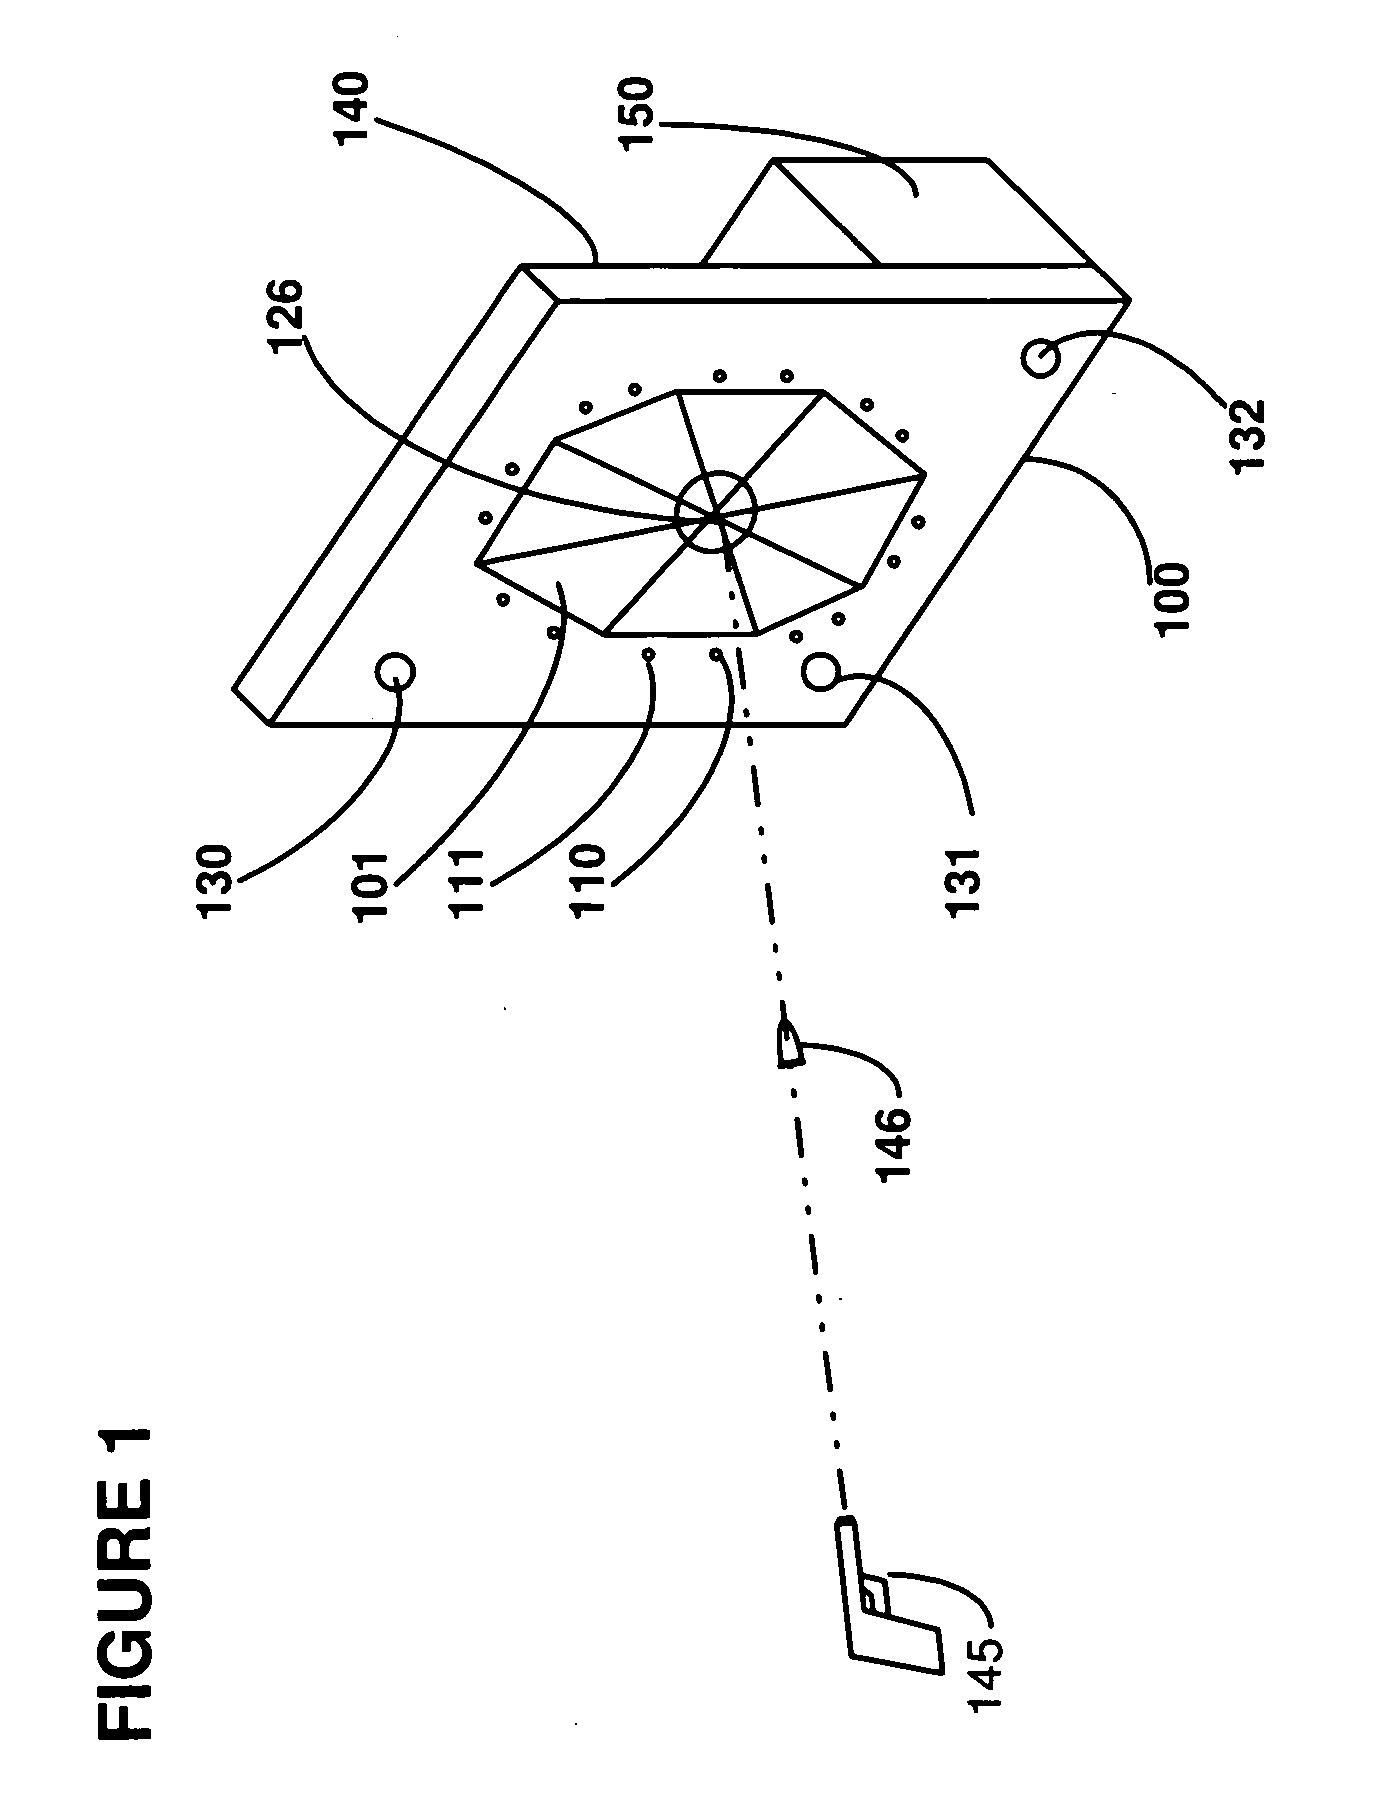 Durable Target Apparatus and Method of On-Target Visual Display